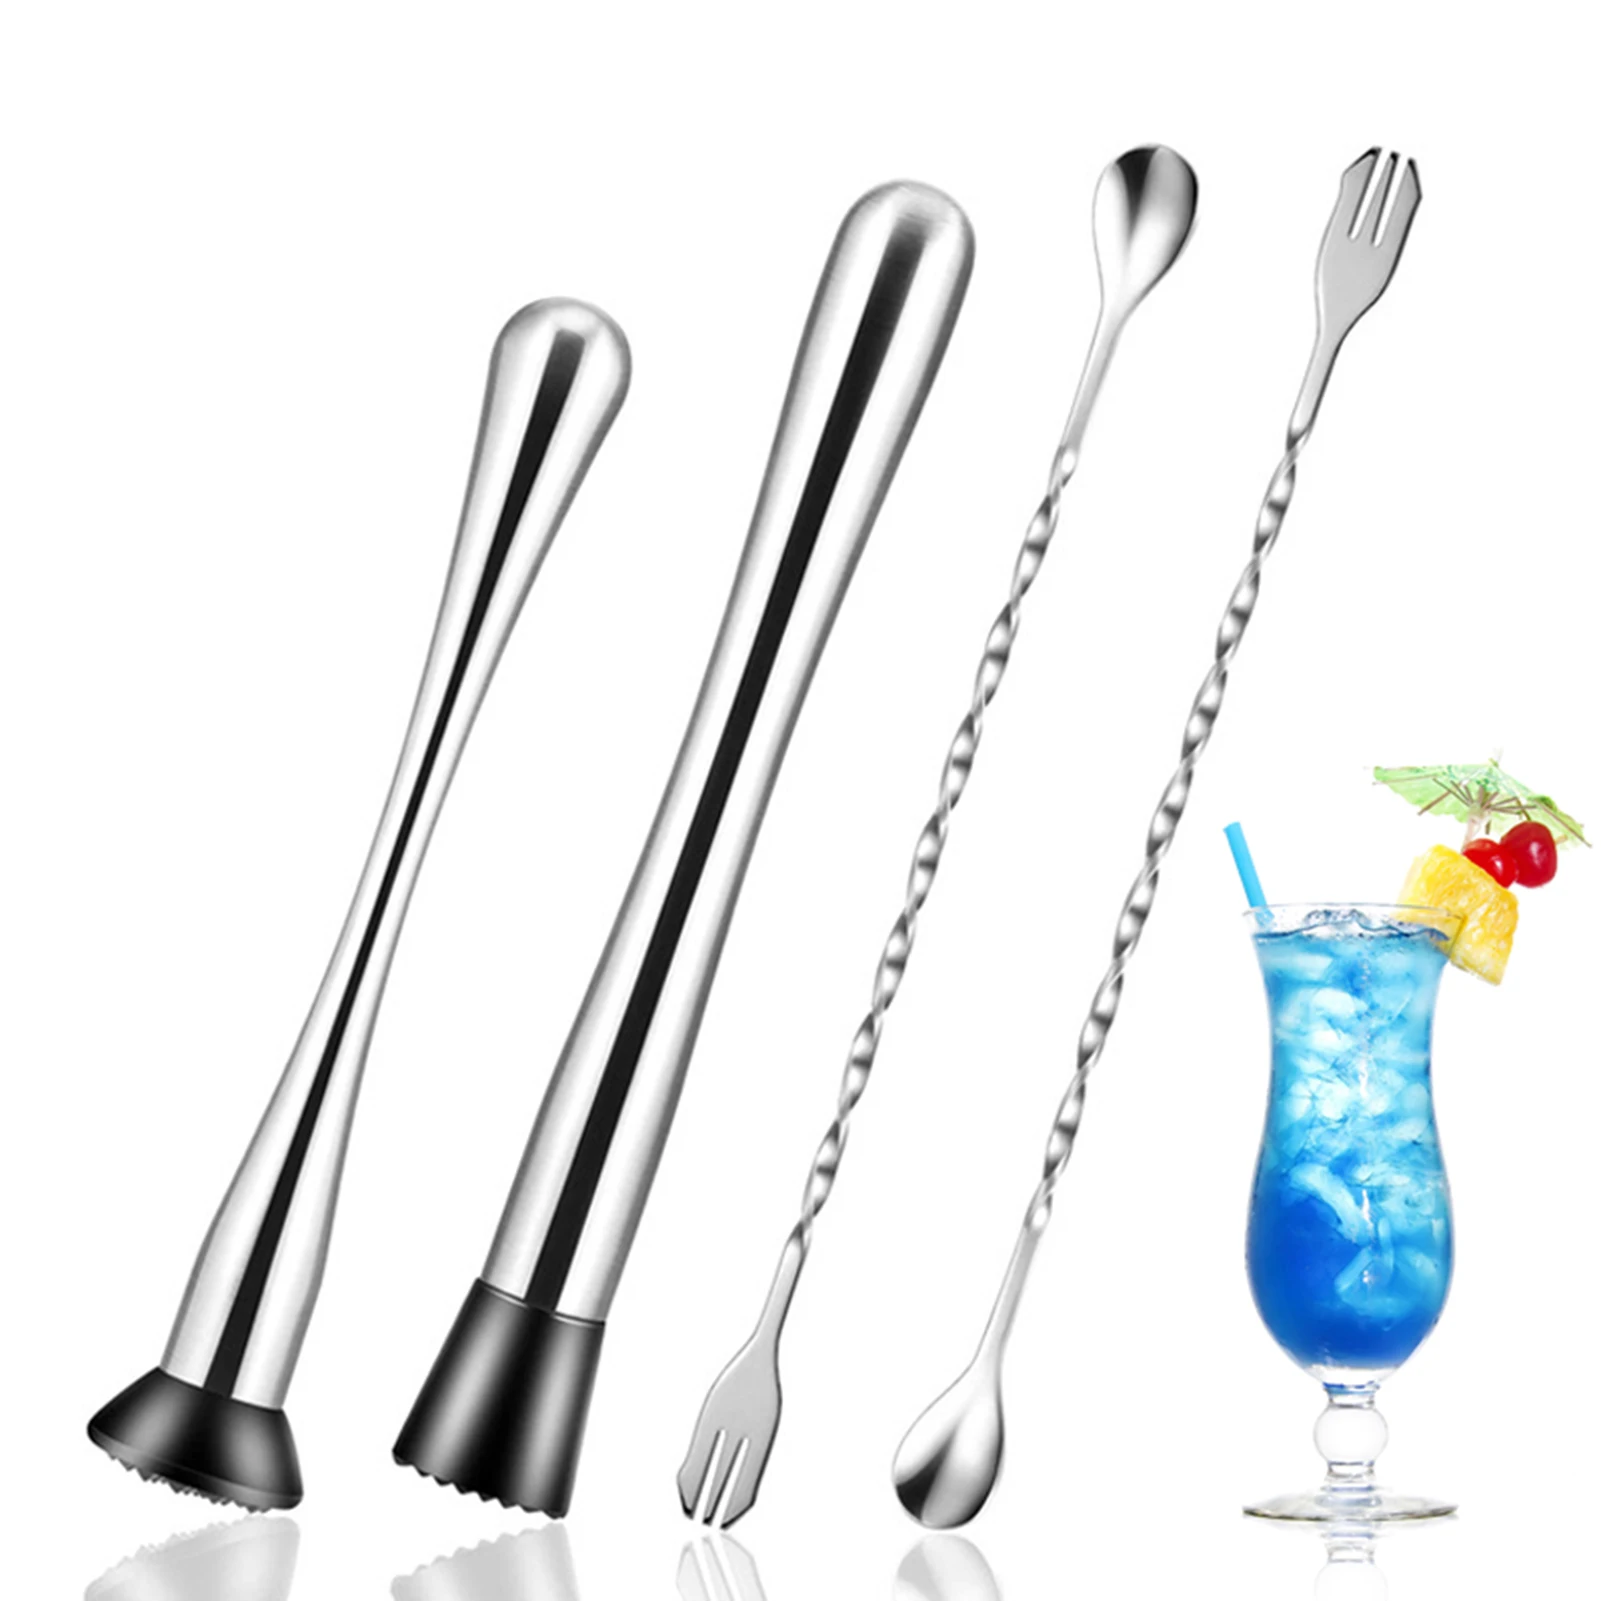 

4 Pack Stainless Steel Cocktail Muddler Mixing Spoon Set Home Bartending Tools Coffee Stirrer Bar Scoops Crushed Popsicles